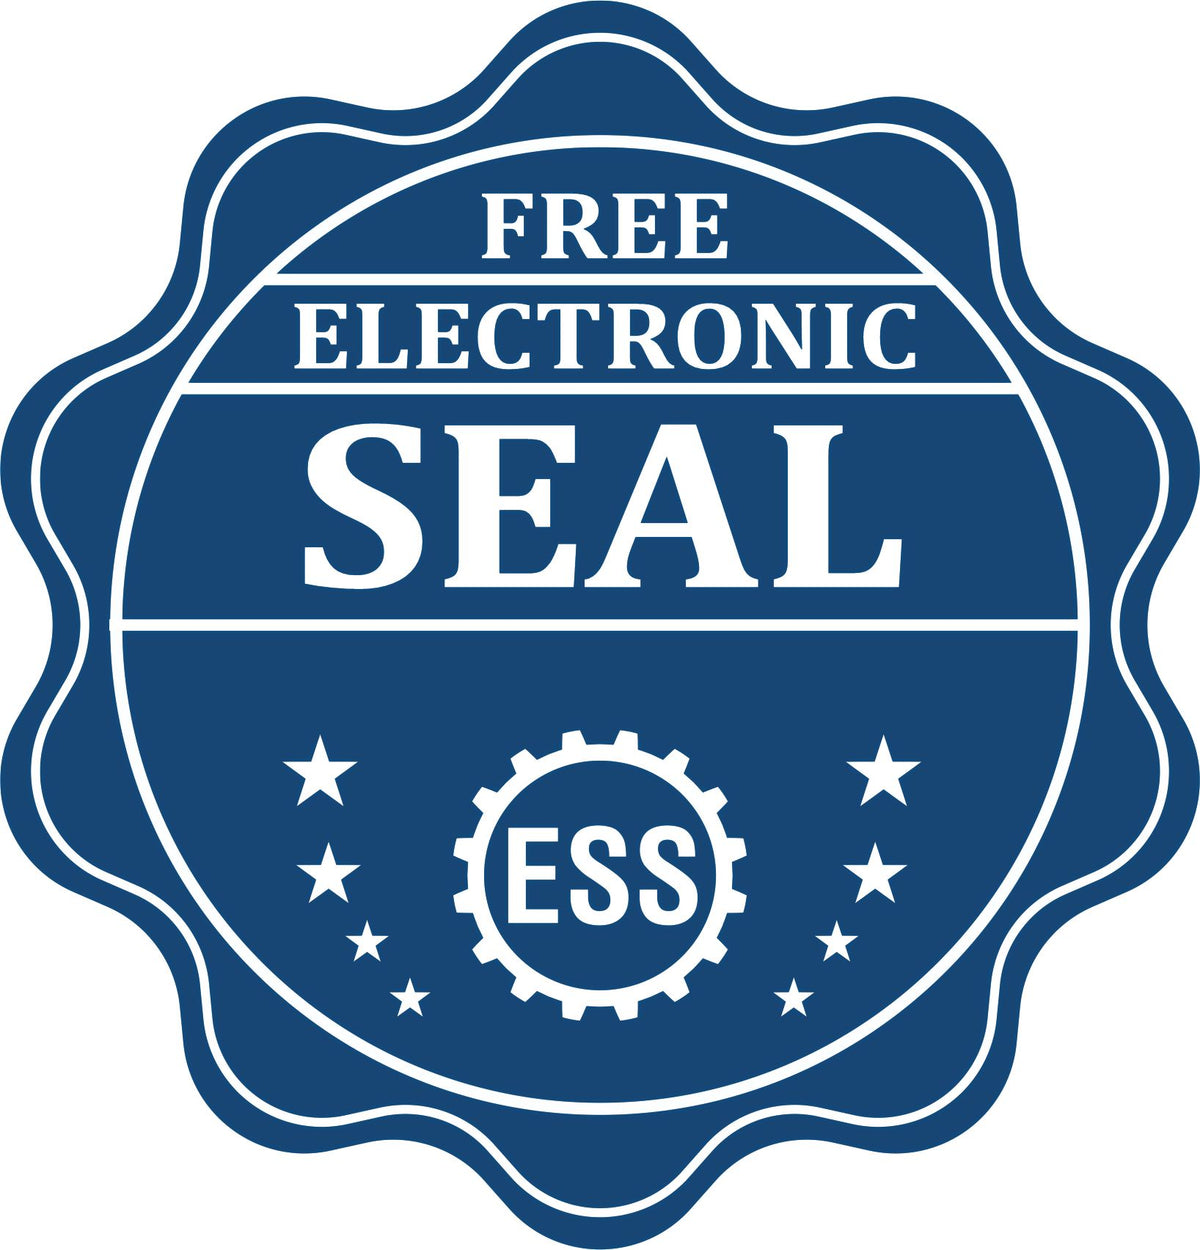 A badge showing a free electronic seal for the Slim Pre-Inked South Carolina Professional Engineer Seal Stamp with stars and the ESS gear on the emblem.